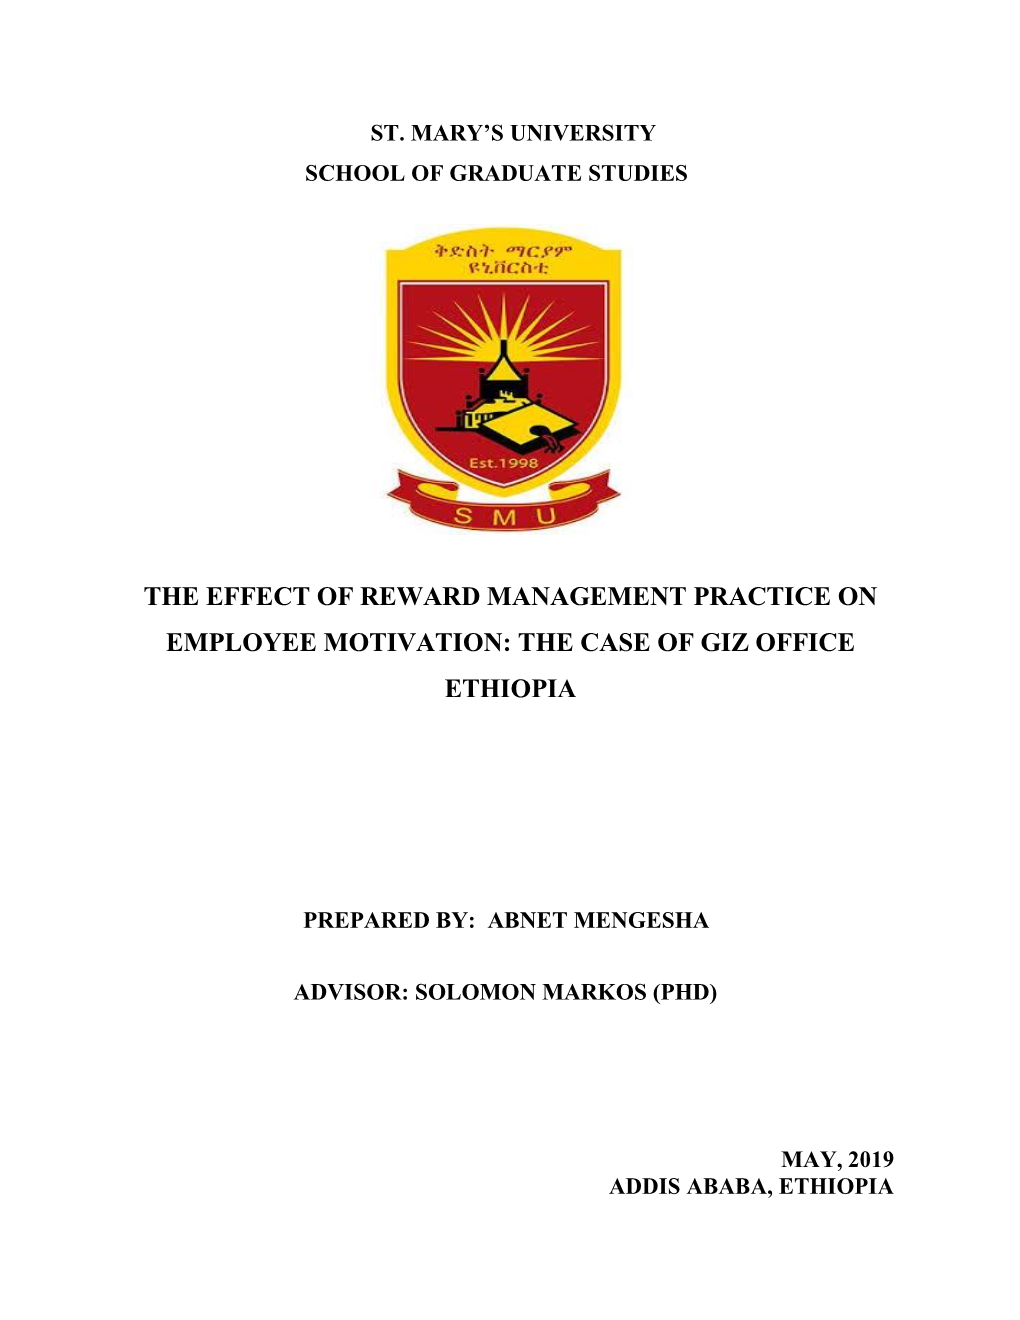 The Effect of Reward Management Practice on Employee Motivation: the Case of Giz Office Ethiopia